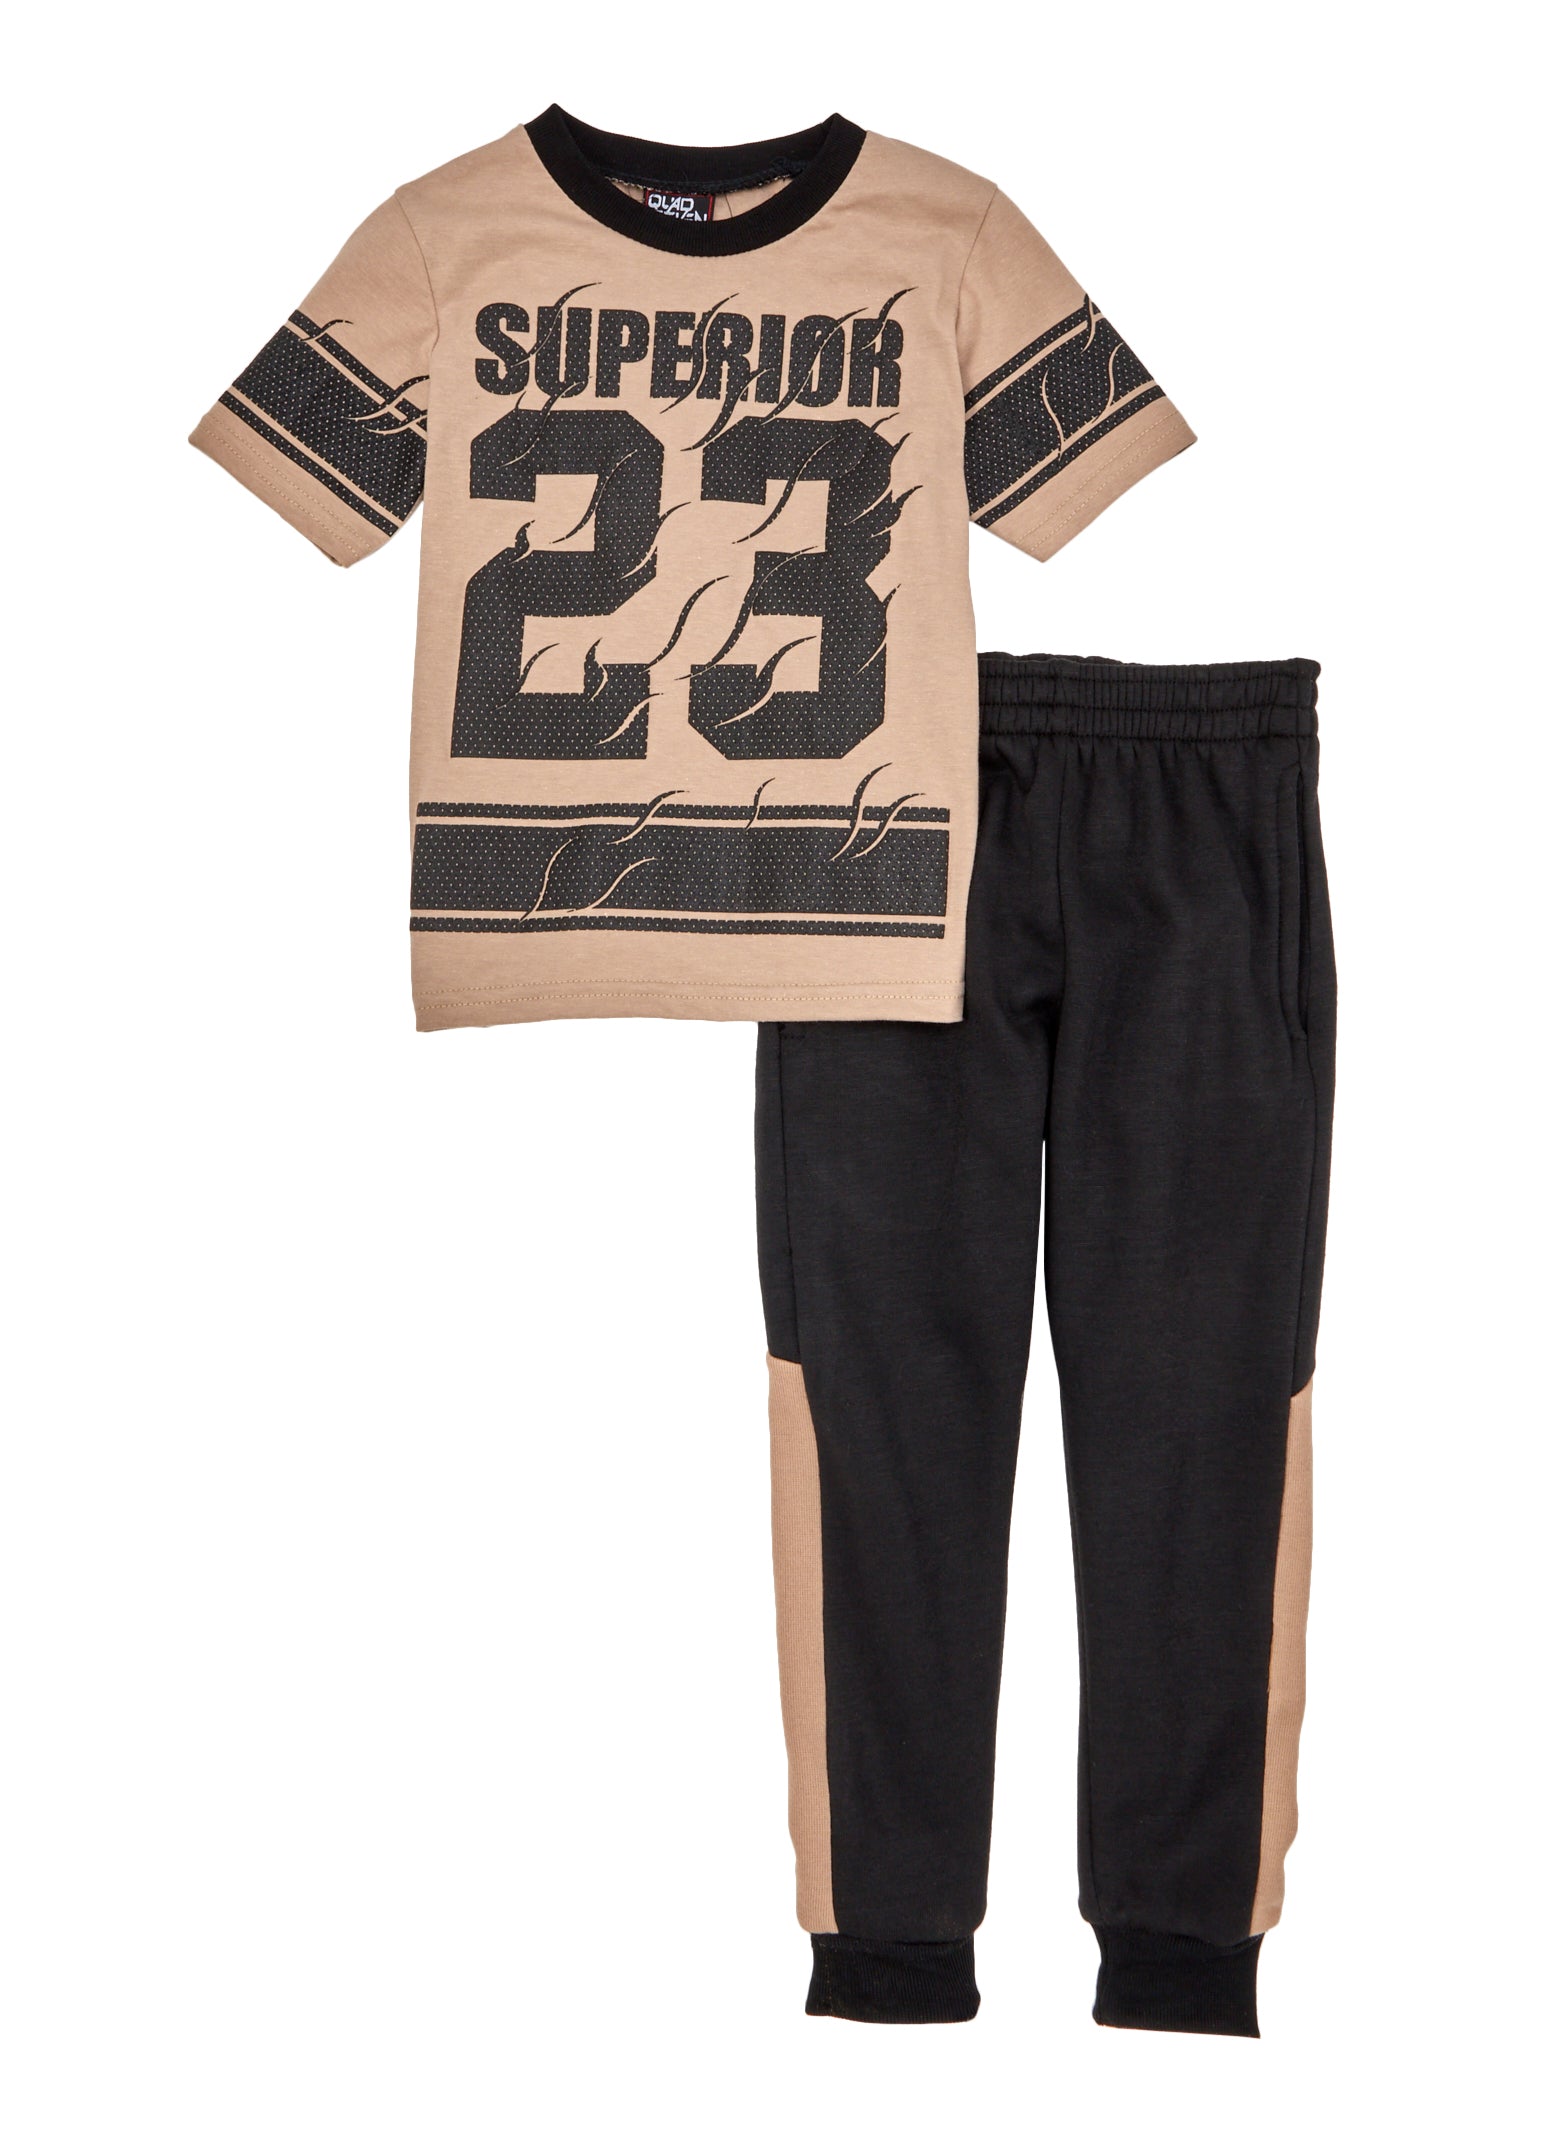 Little Boys Superior 23 Graphic Tee and Joggers, Beige, Size 5-6